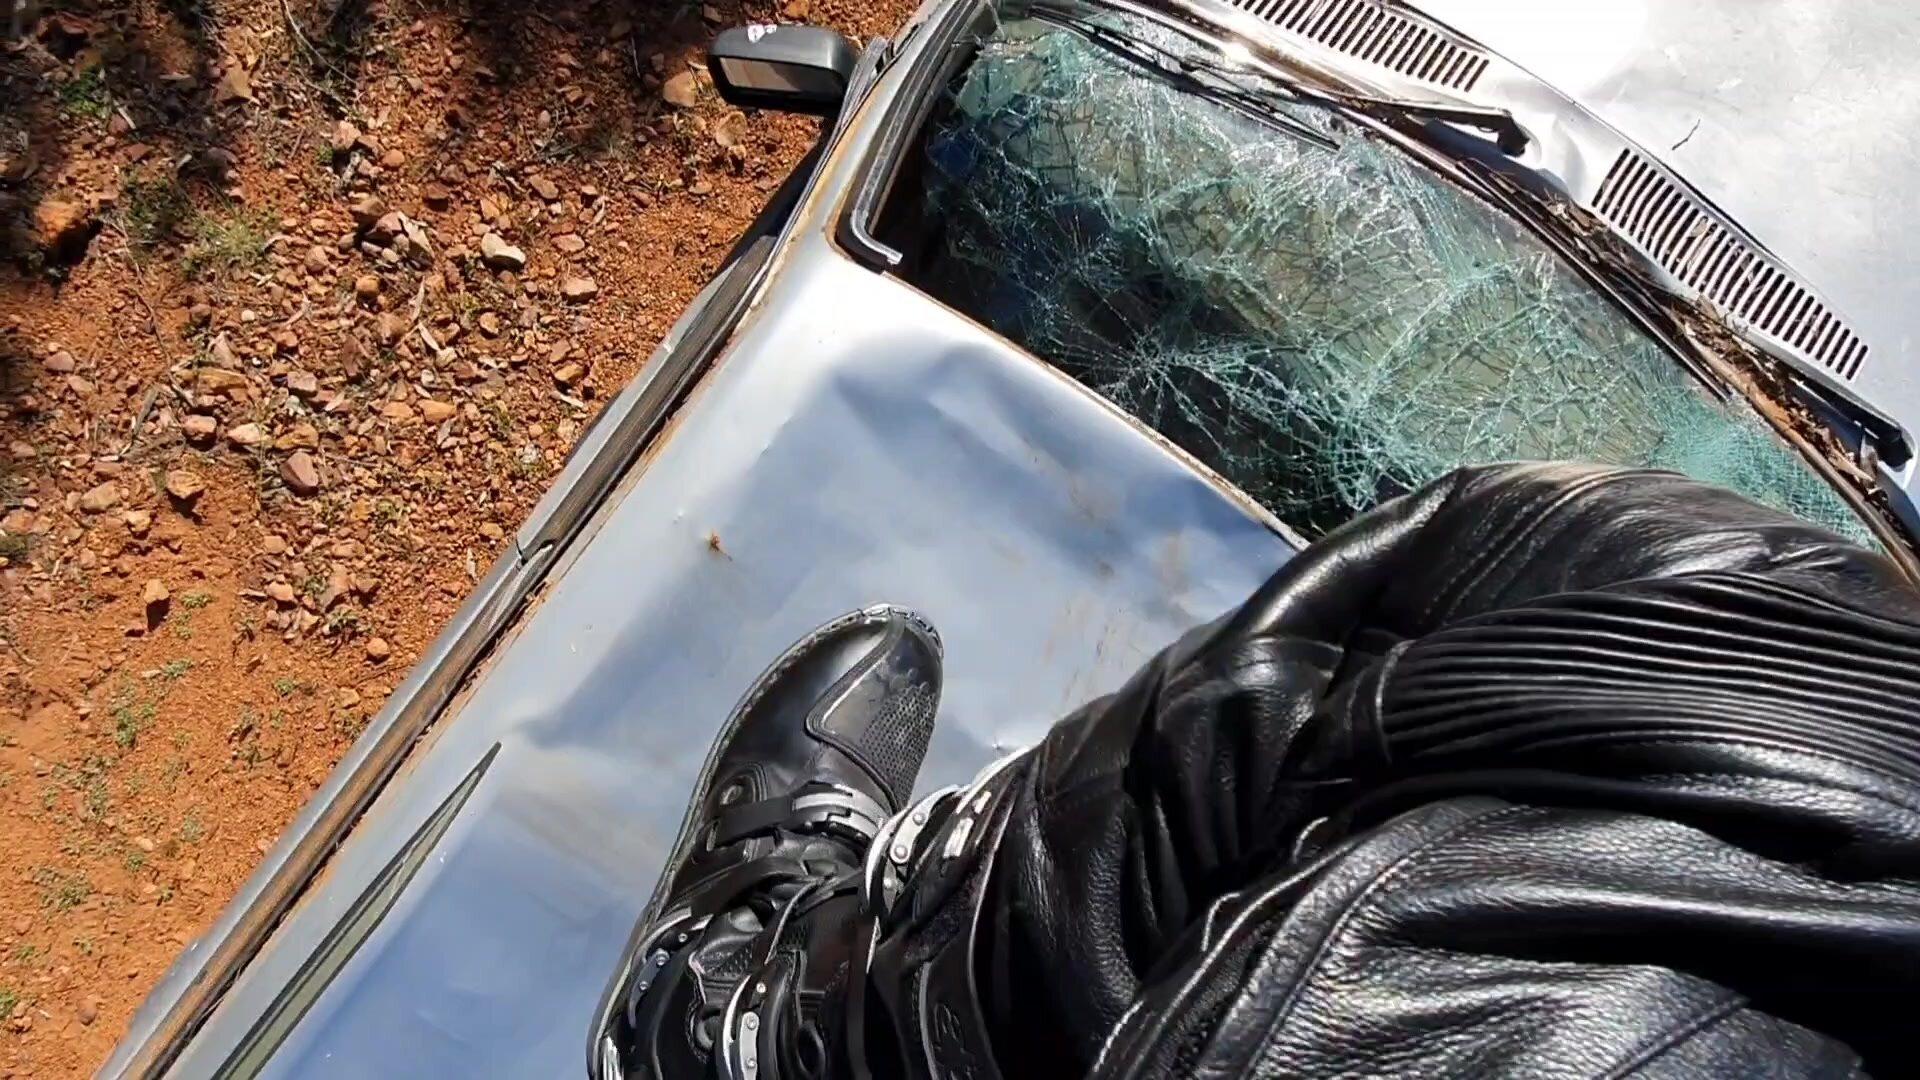 Leather biker's POV of boots stomping old car